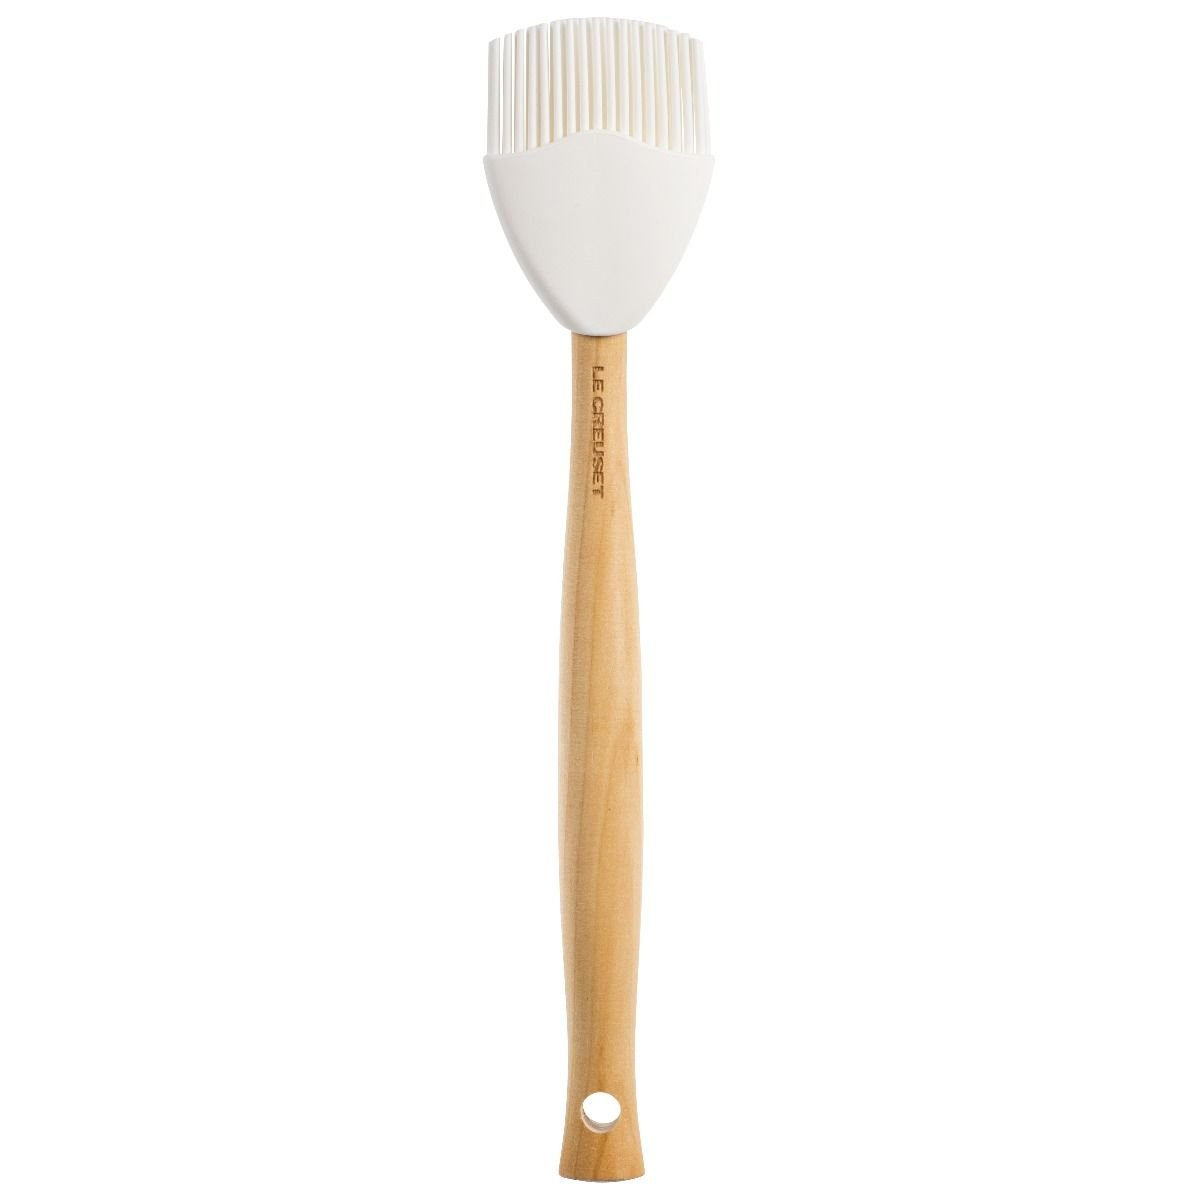 OXO Good Grips Silicone Basting Brush, 1 ct - Food 4 Less